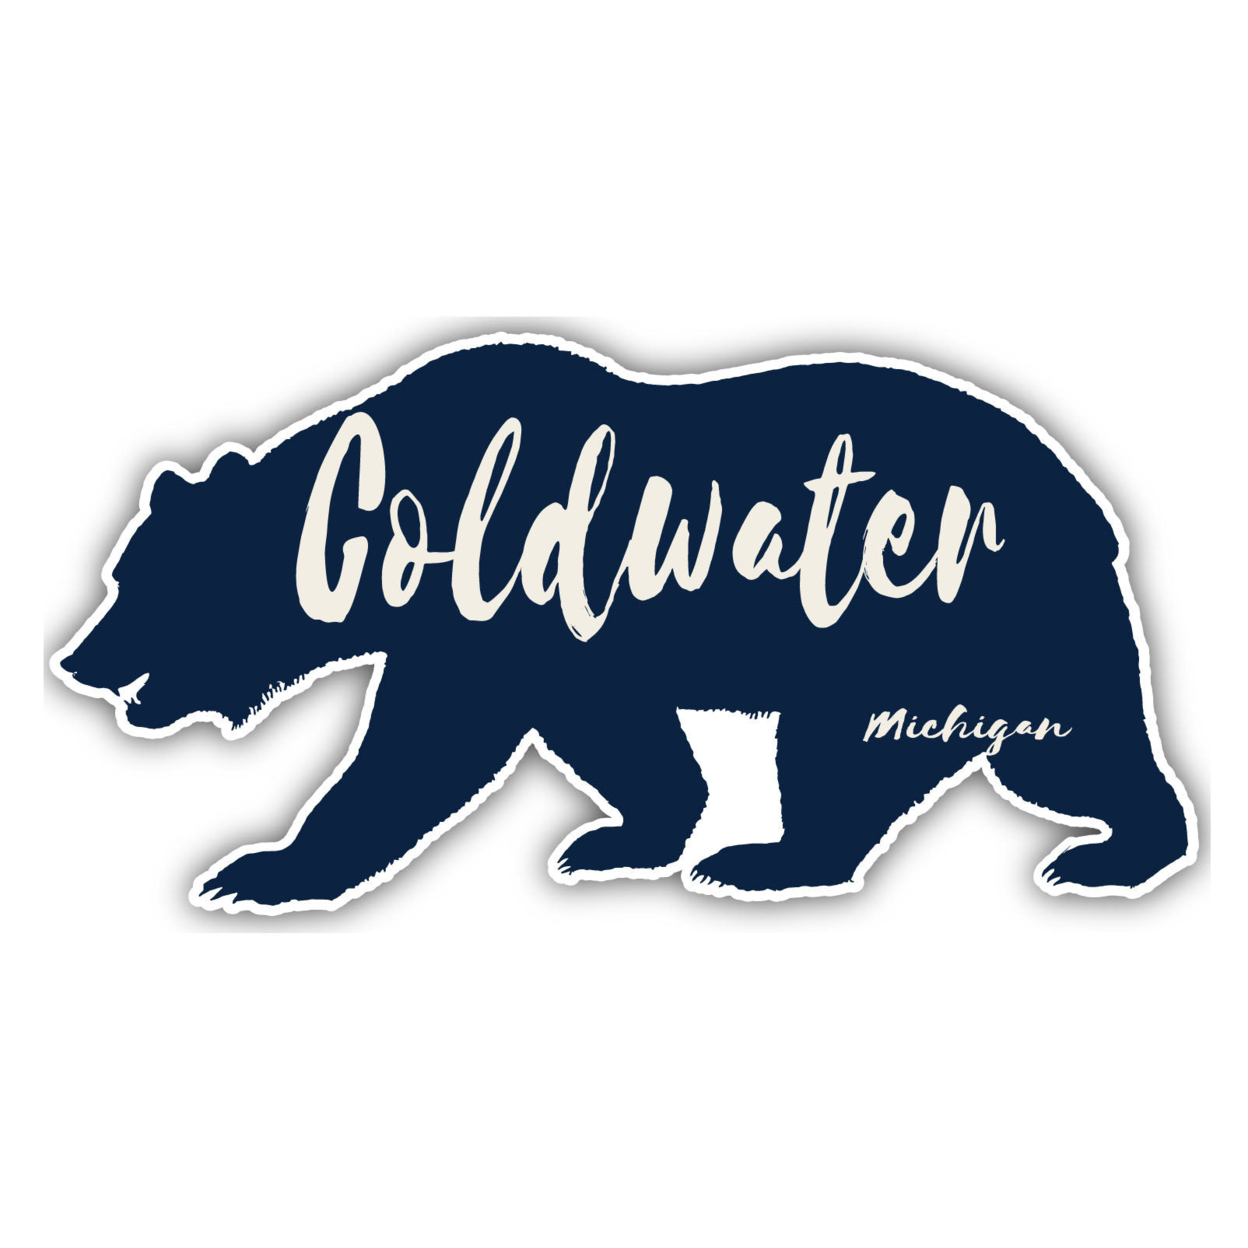 Coldwater Michigan Souvenir Decorative Stickers (Choose Theme And Size) - 4-Pack, 8-Inch, Bear